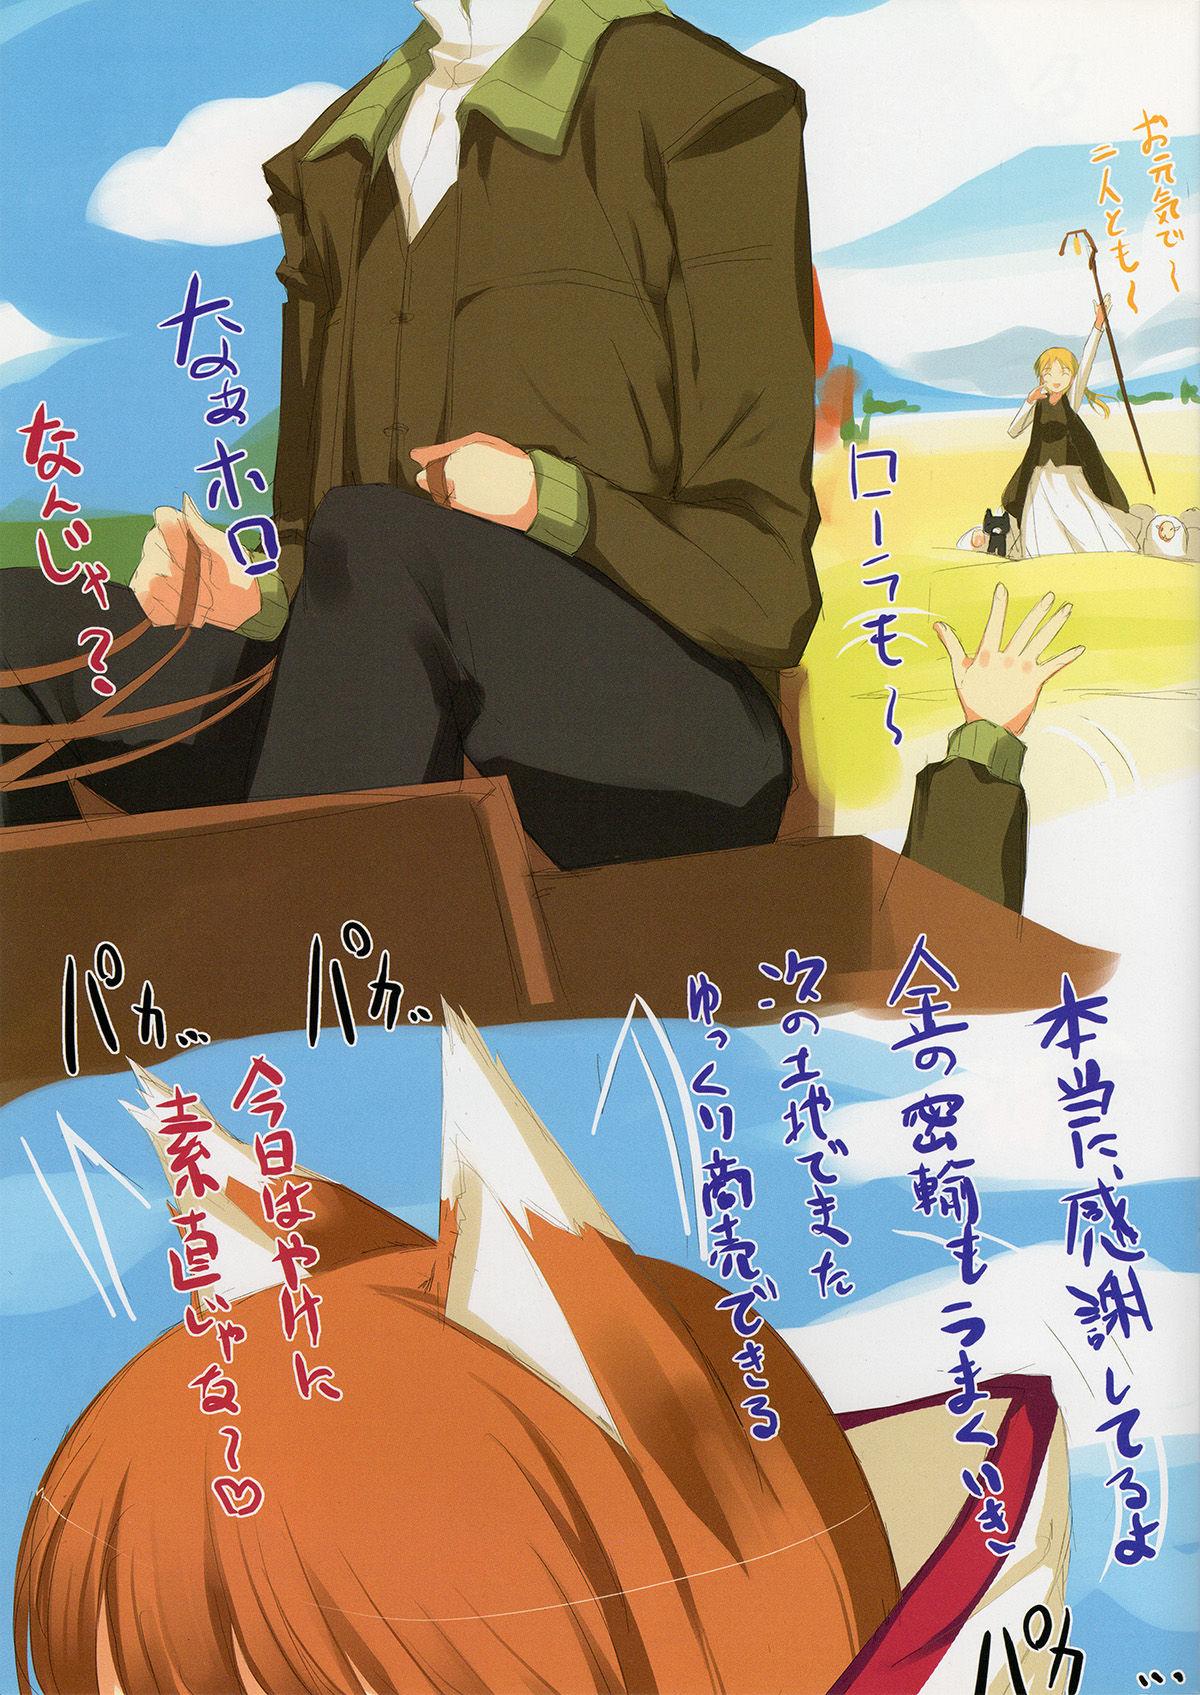 Milfsex Ookami no Kimagure Hon - Spice and wolf Hard Porn - Page 2